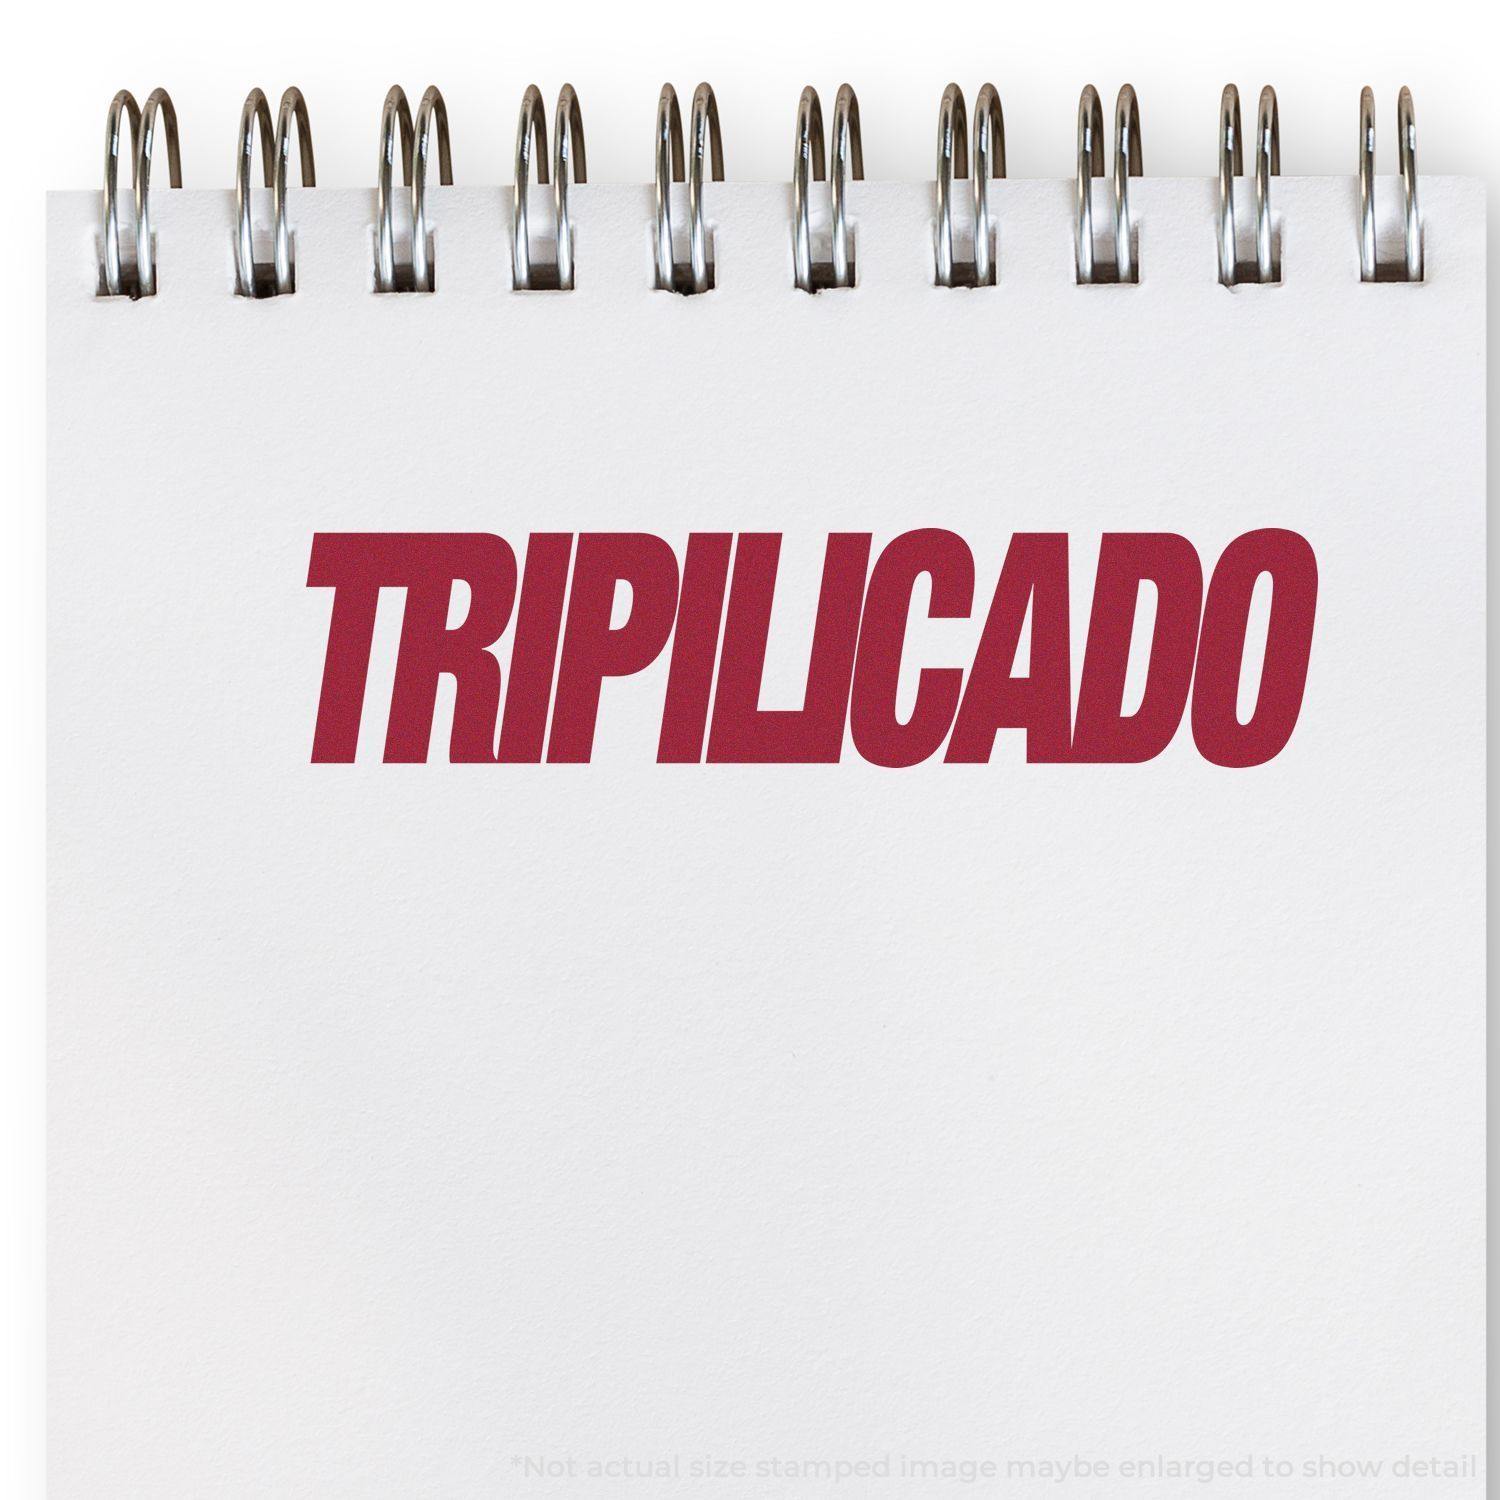 A self-inking stamp with a stamped image showing how the text "TRIPILICADO" in a large italic font is displayed by it after stamping.